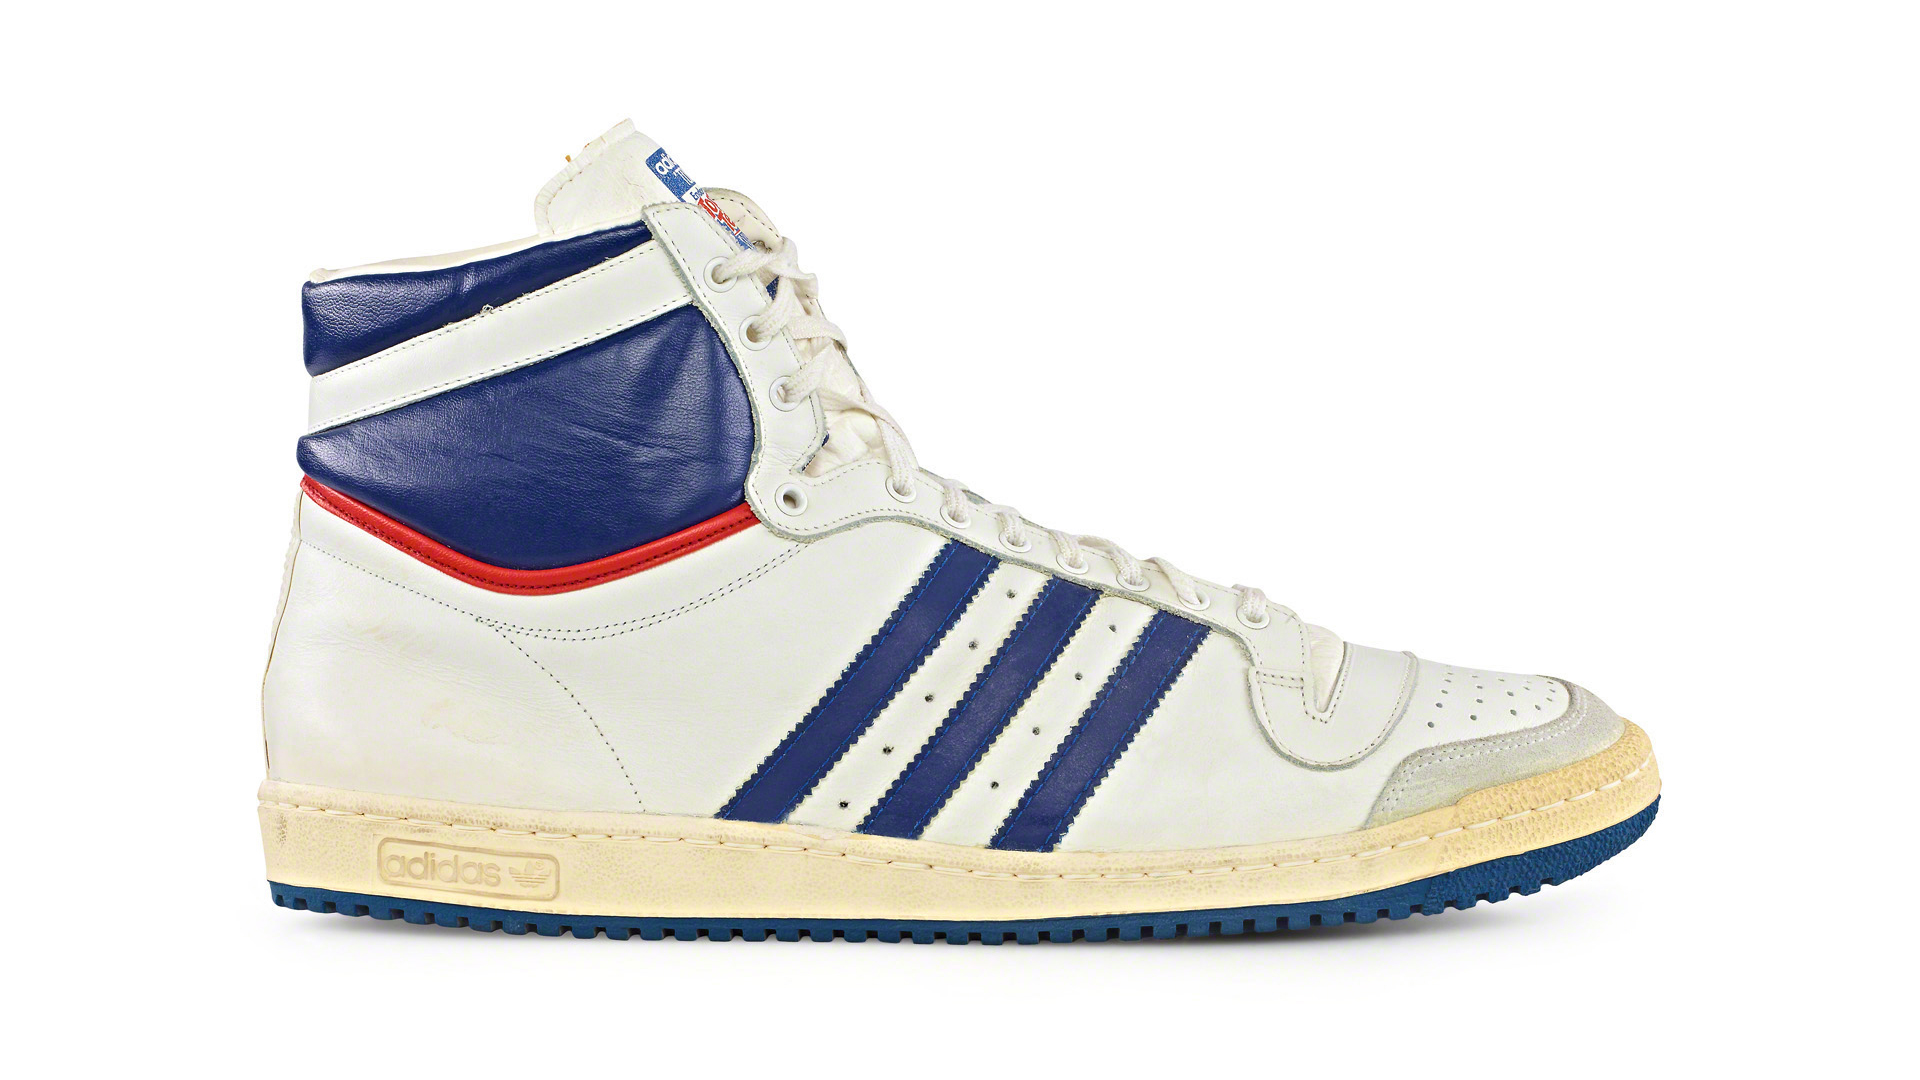 Adidas Sneakers: Short History, Styles, Collaboration